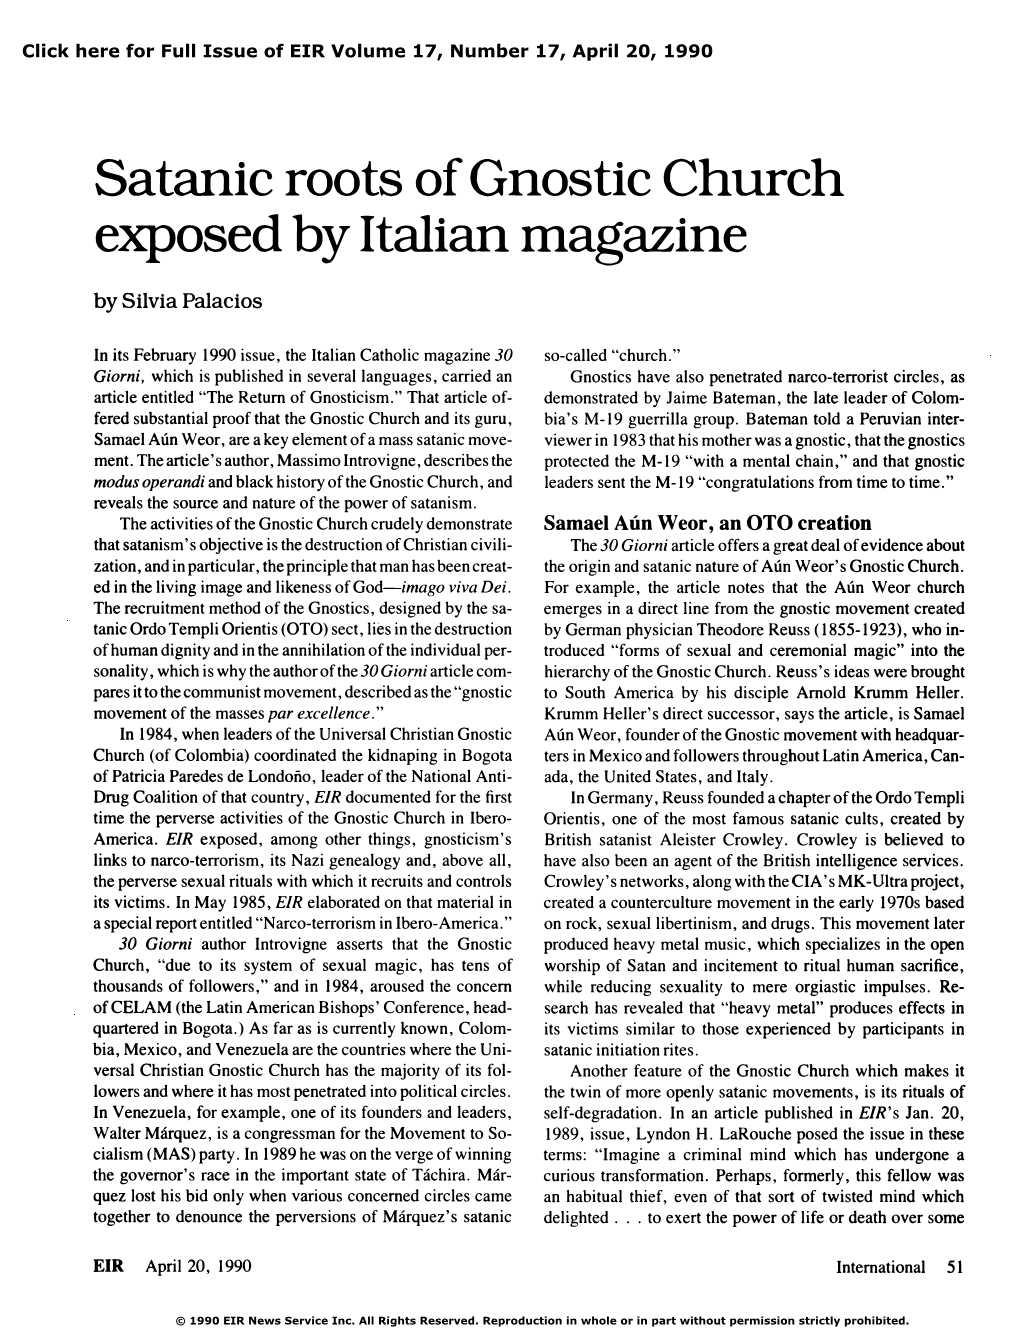 Satanic Roots of Gnostic Church Exposed by Italian Magazine